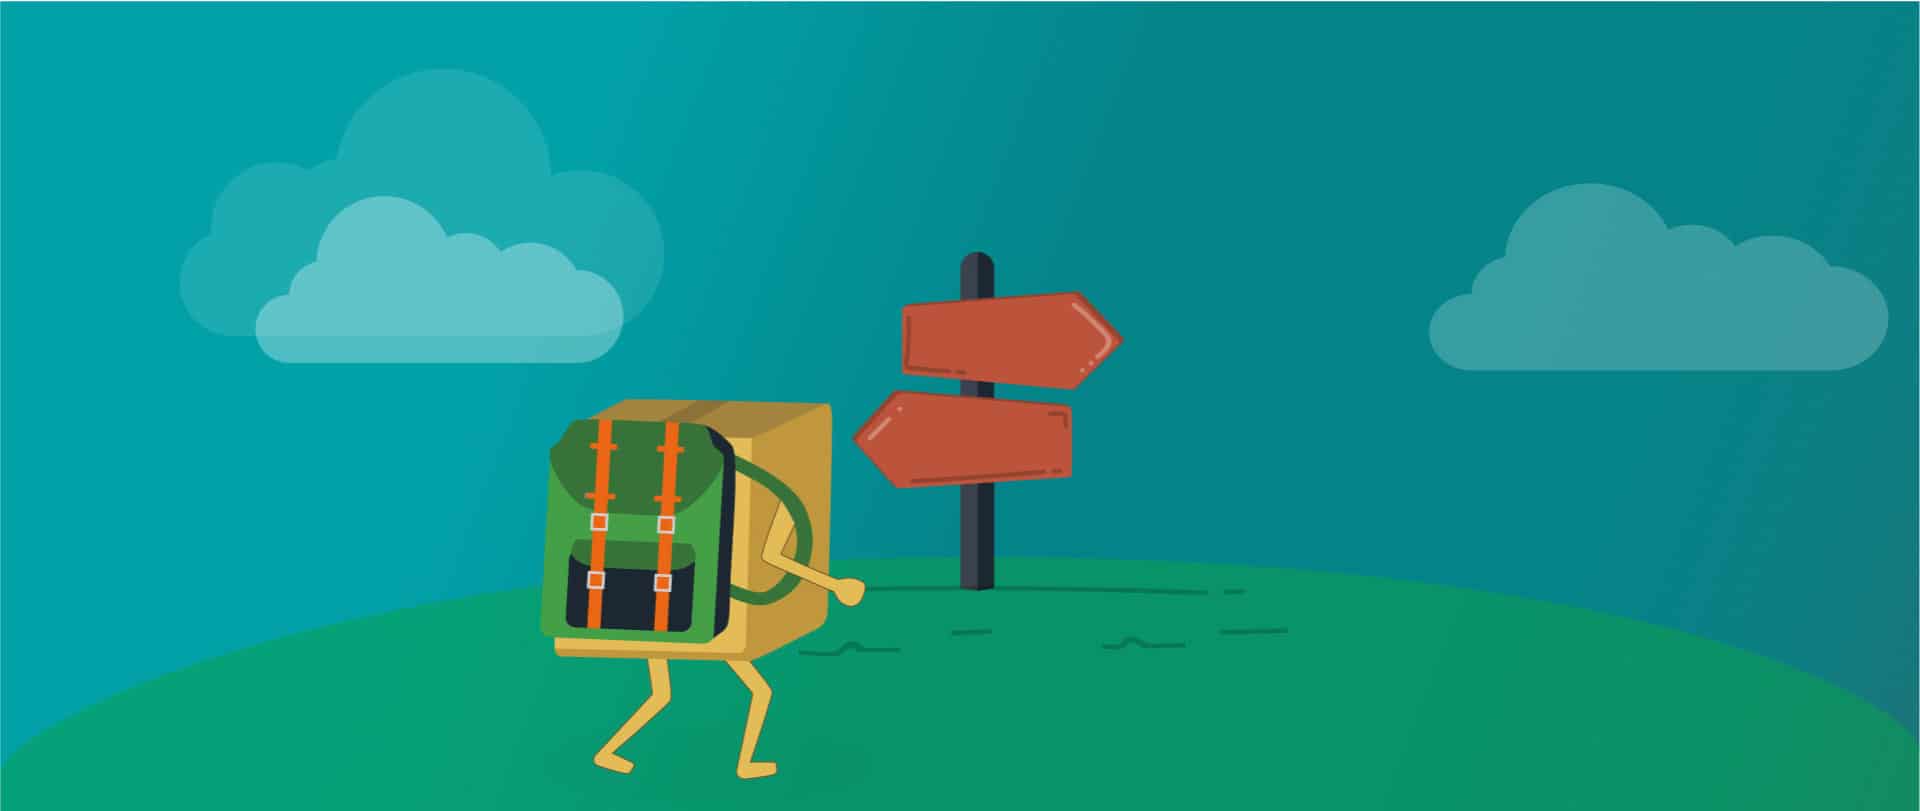 Bob the Box hitchhikes up a hill to find his new warehouse location.